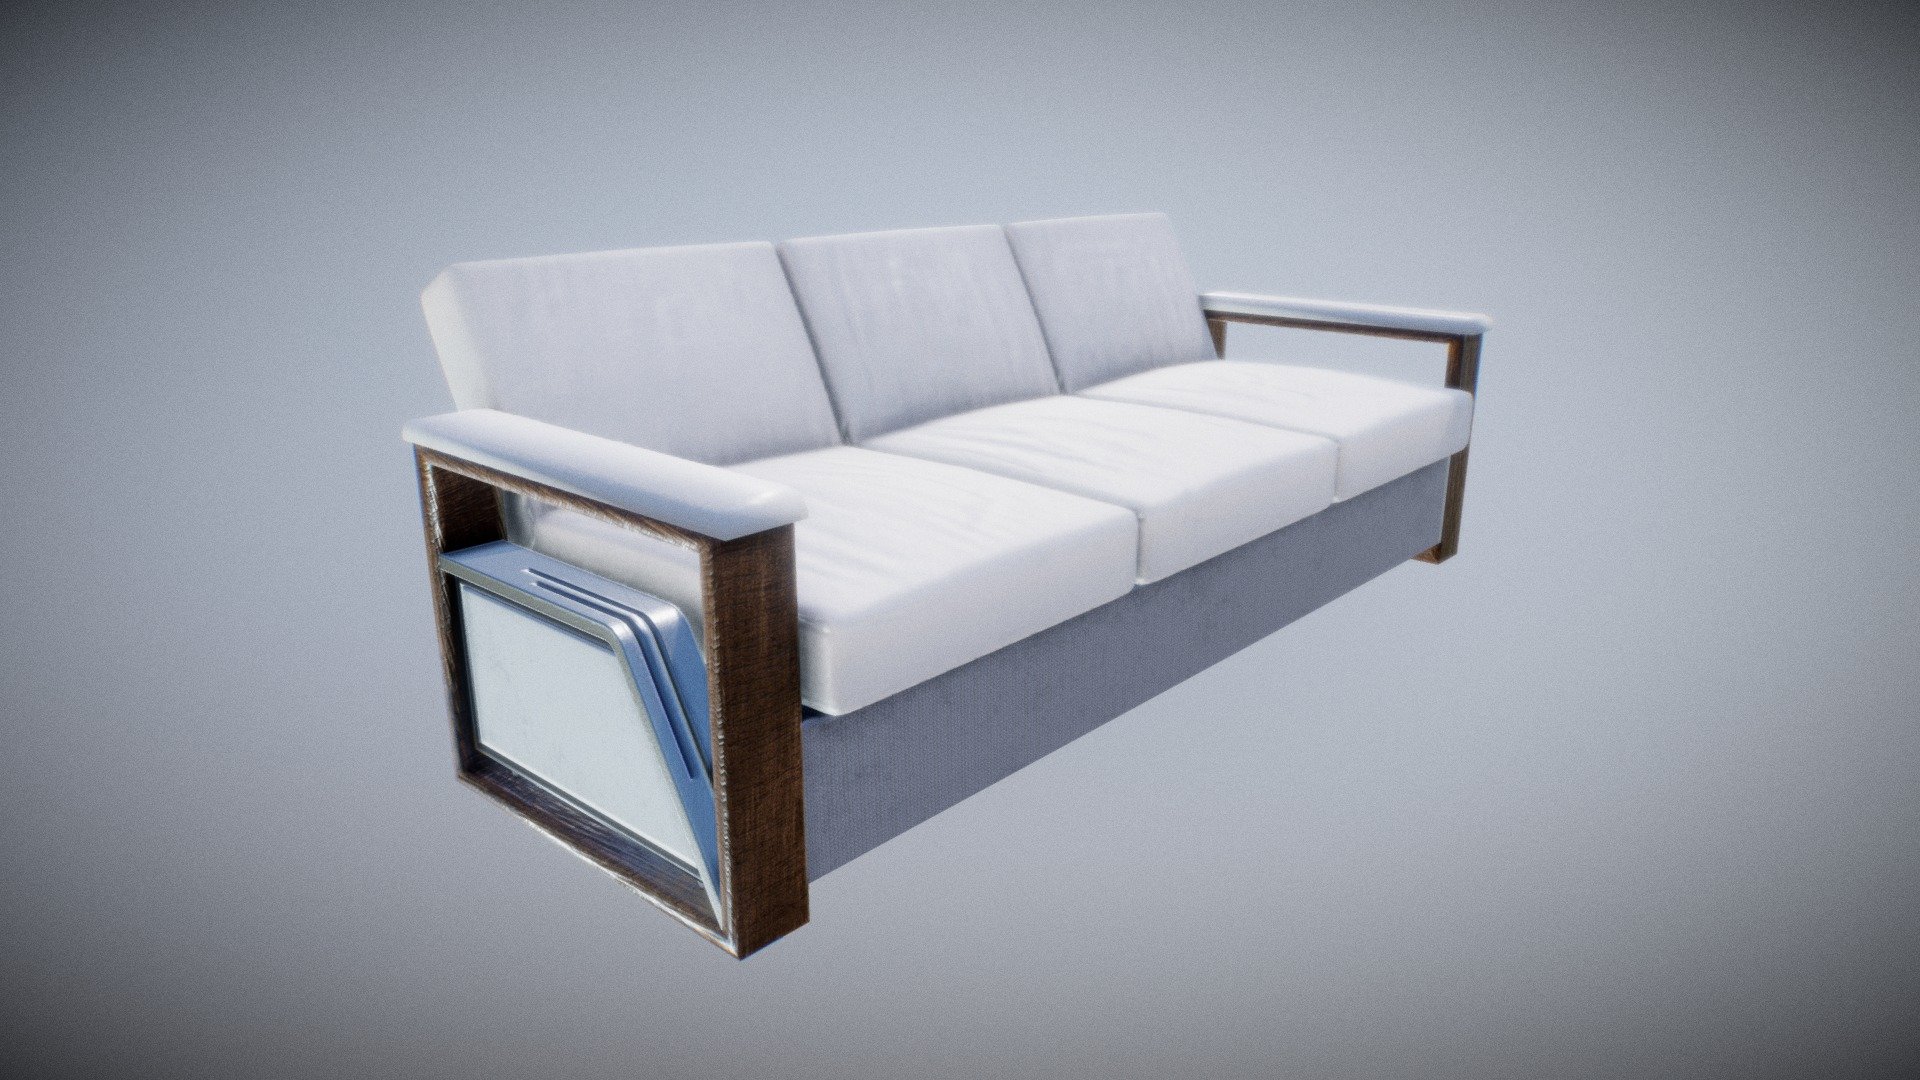 A couch for our upcoming game, Adam's Ale. 
Would come really handy on weekends. 
Modeled by - Gurdit Singh - Couch : Adam's Ale - 3D model by KNOBGames 3d model